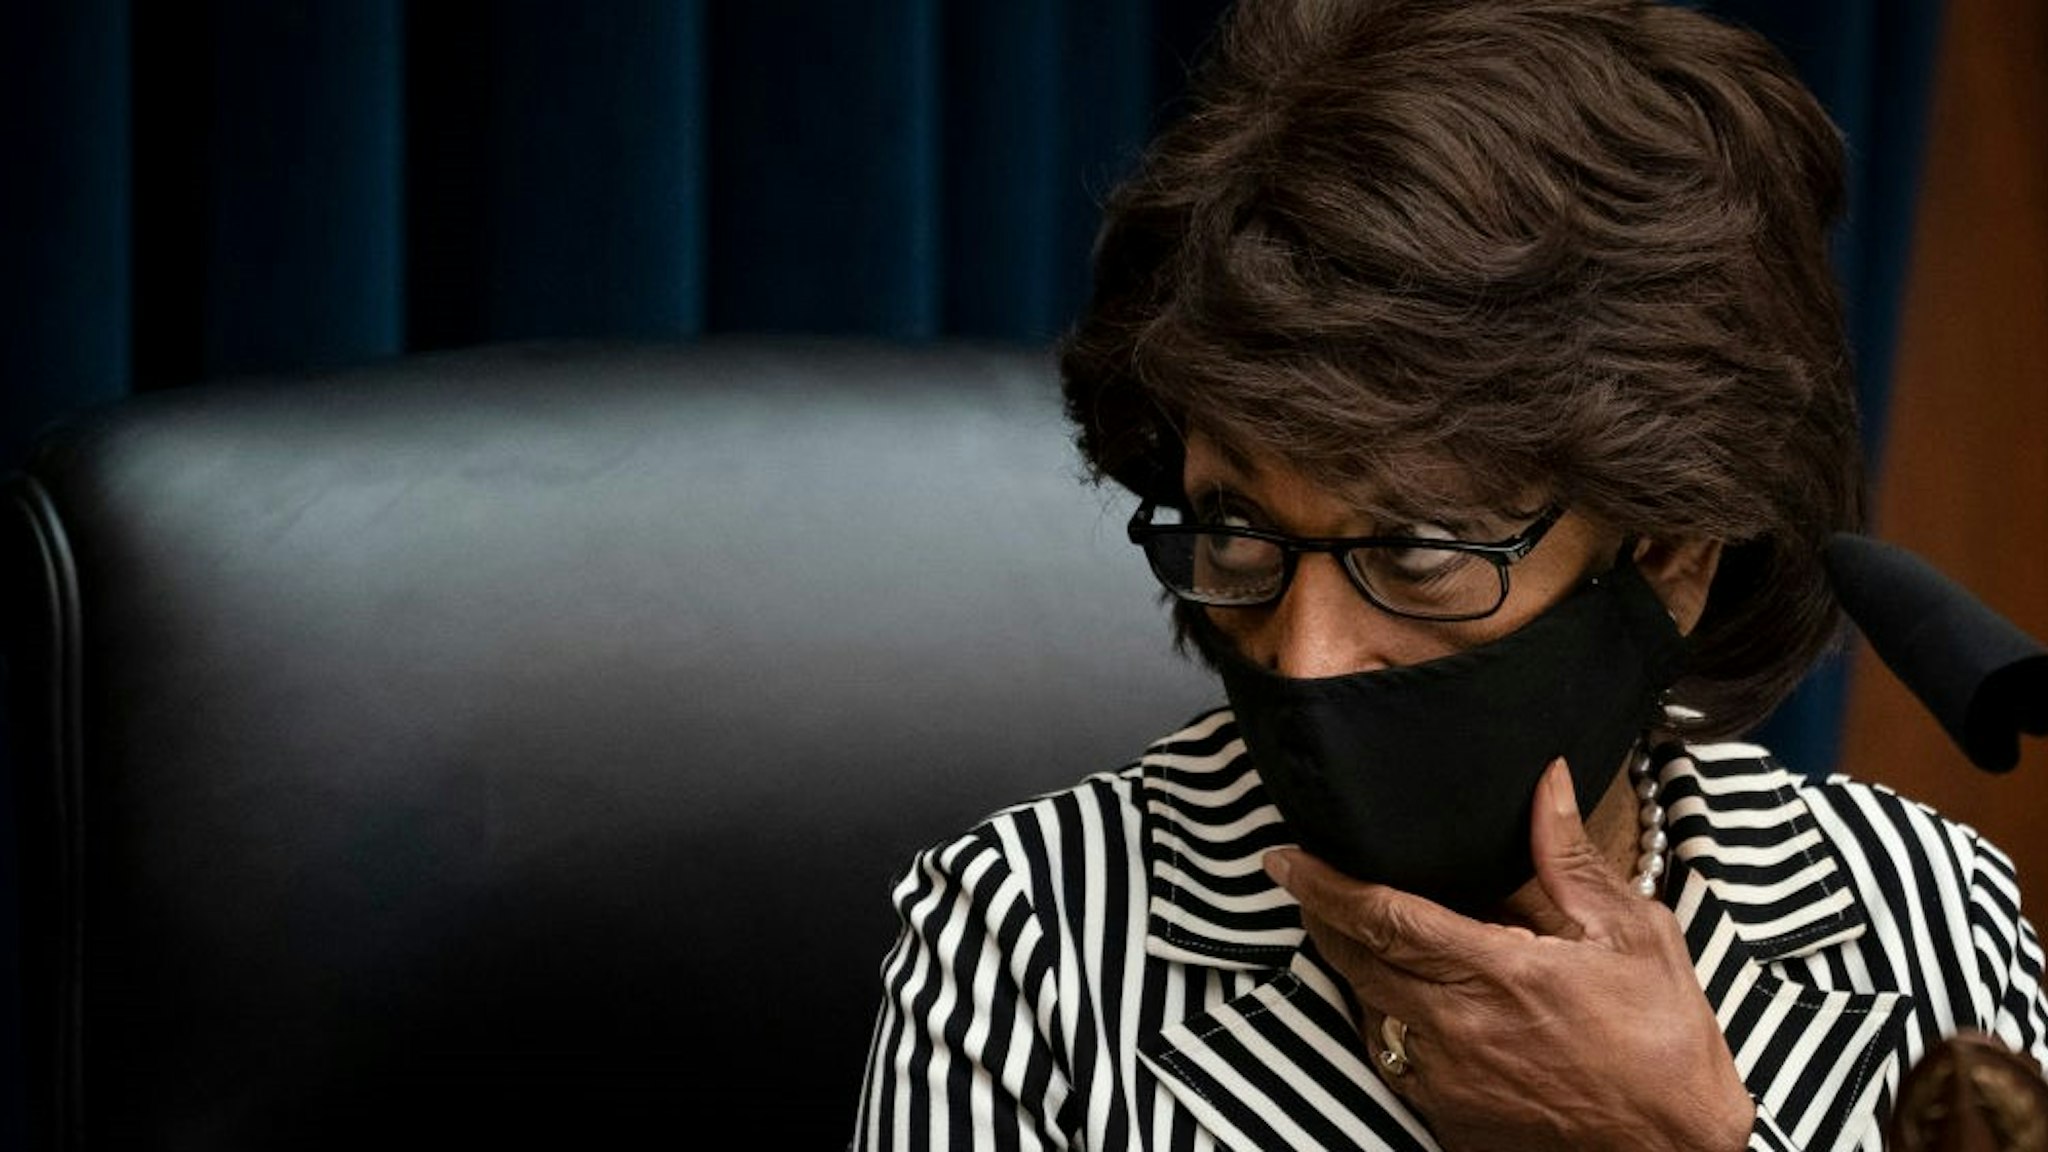 WASHINGTON, DC - JULY 30: Committee chairwoman Rep. Maxine Waters (D-CA) arrives for a House Financial Services Committee hearing regarding the Consumer Financial Protection Bureau in the Rayburn House Office Building on Capitol Hill July 30, 2020 in Washington, DC. (Photo by